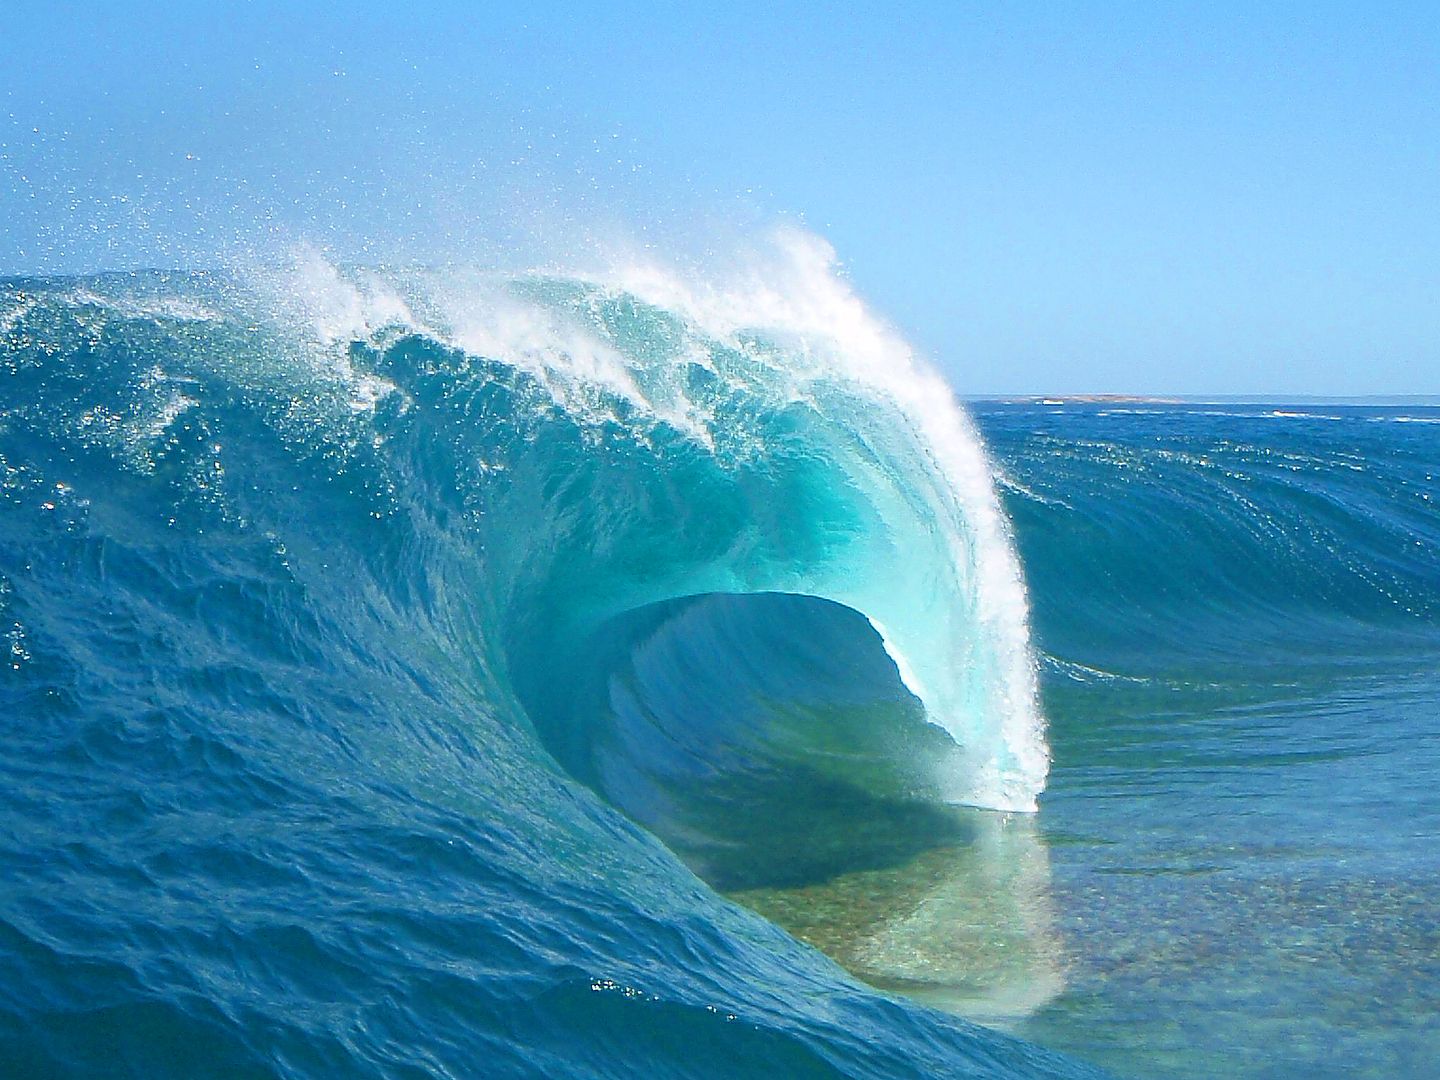 Cyclops Australia This Is A Heavy Wave With A Shallow Reef That You Do Not Want To Take A Spill On Surfing Pictures Waves Ocean Waves